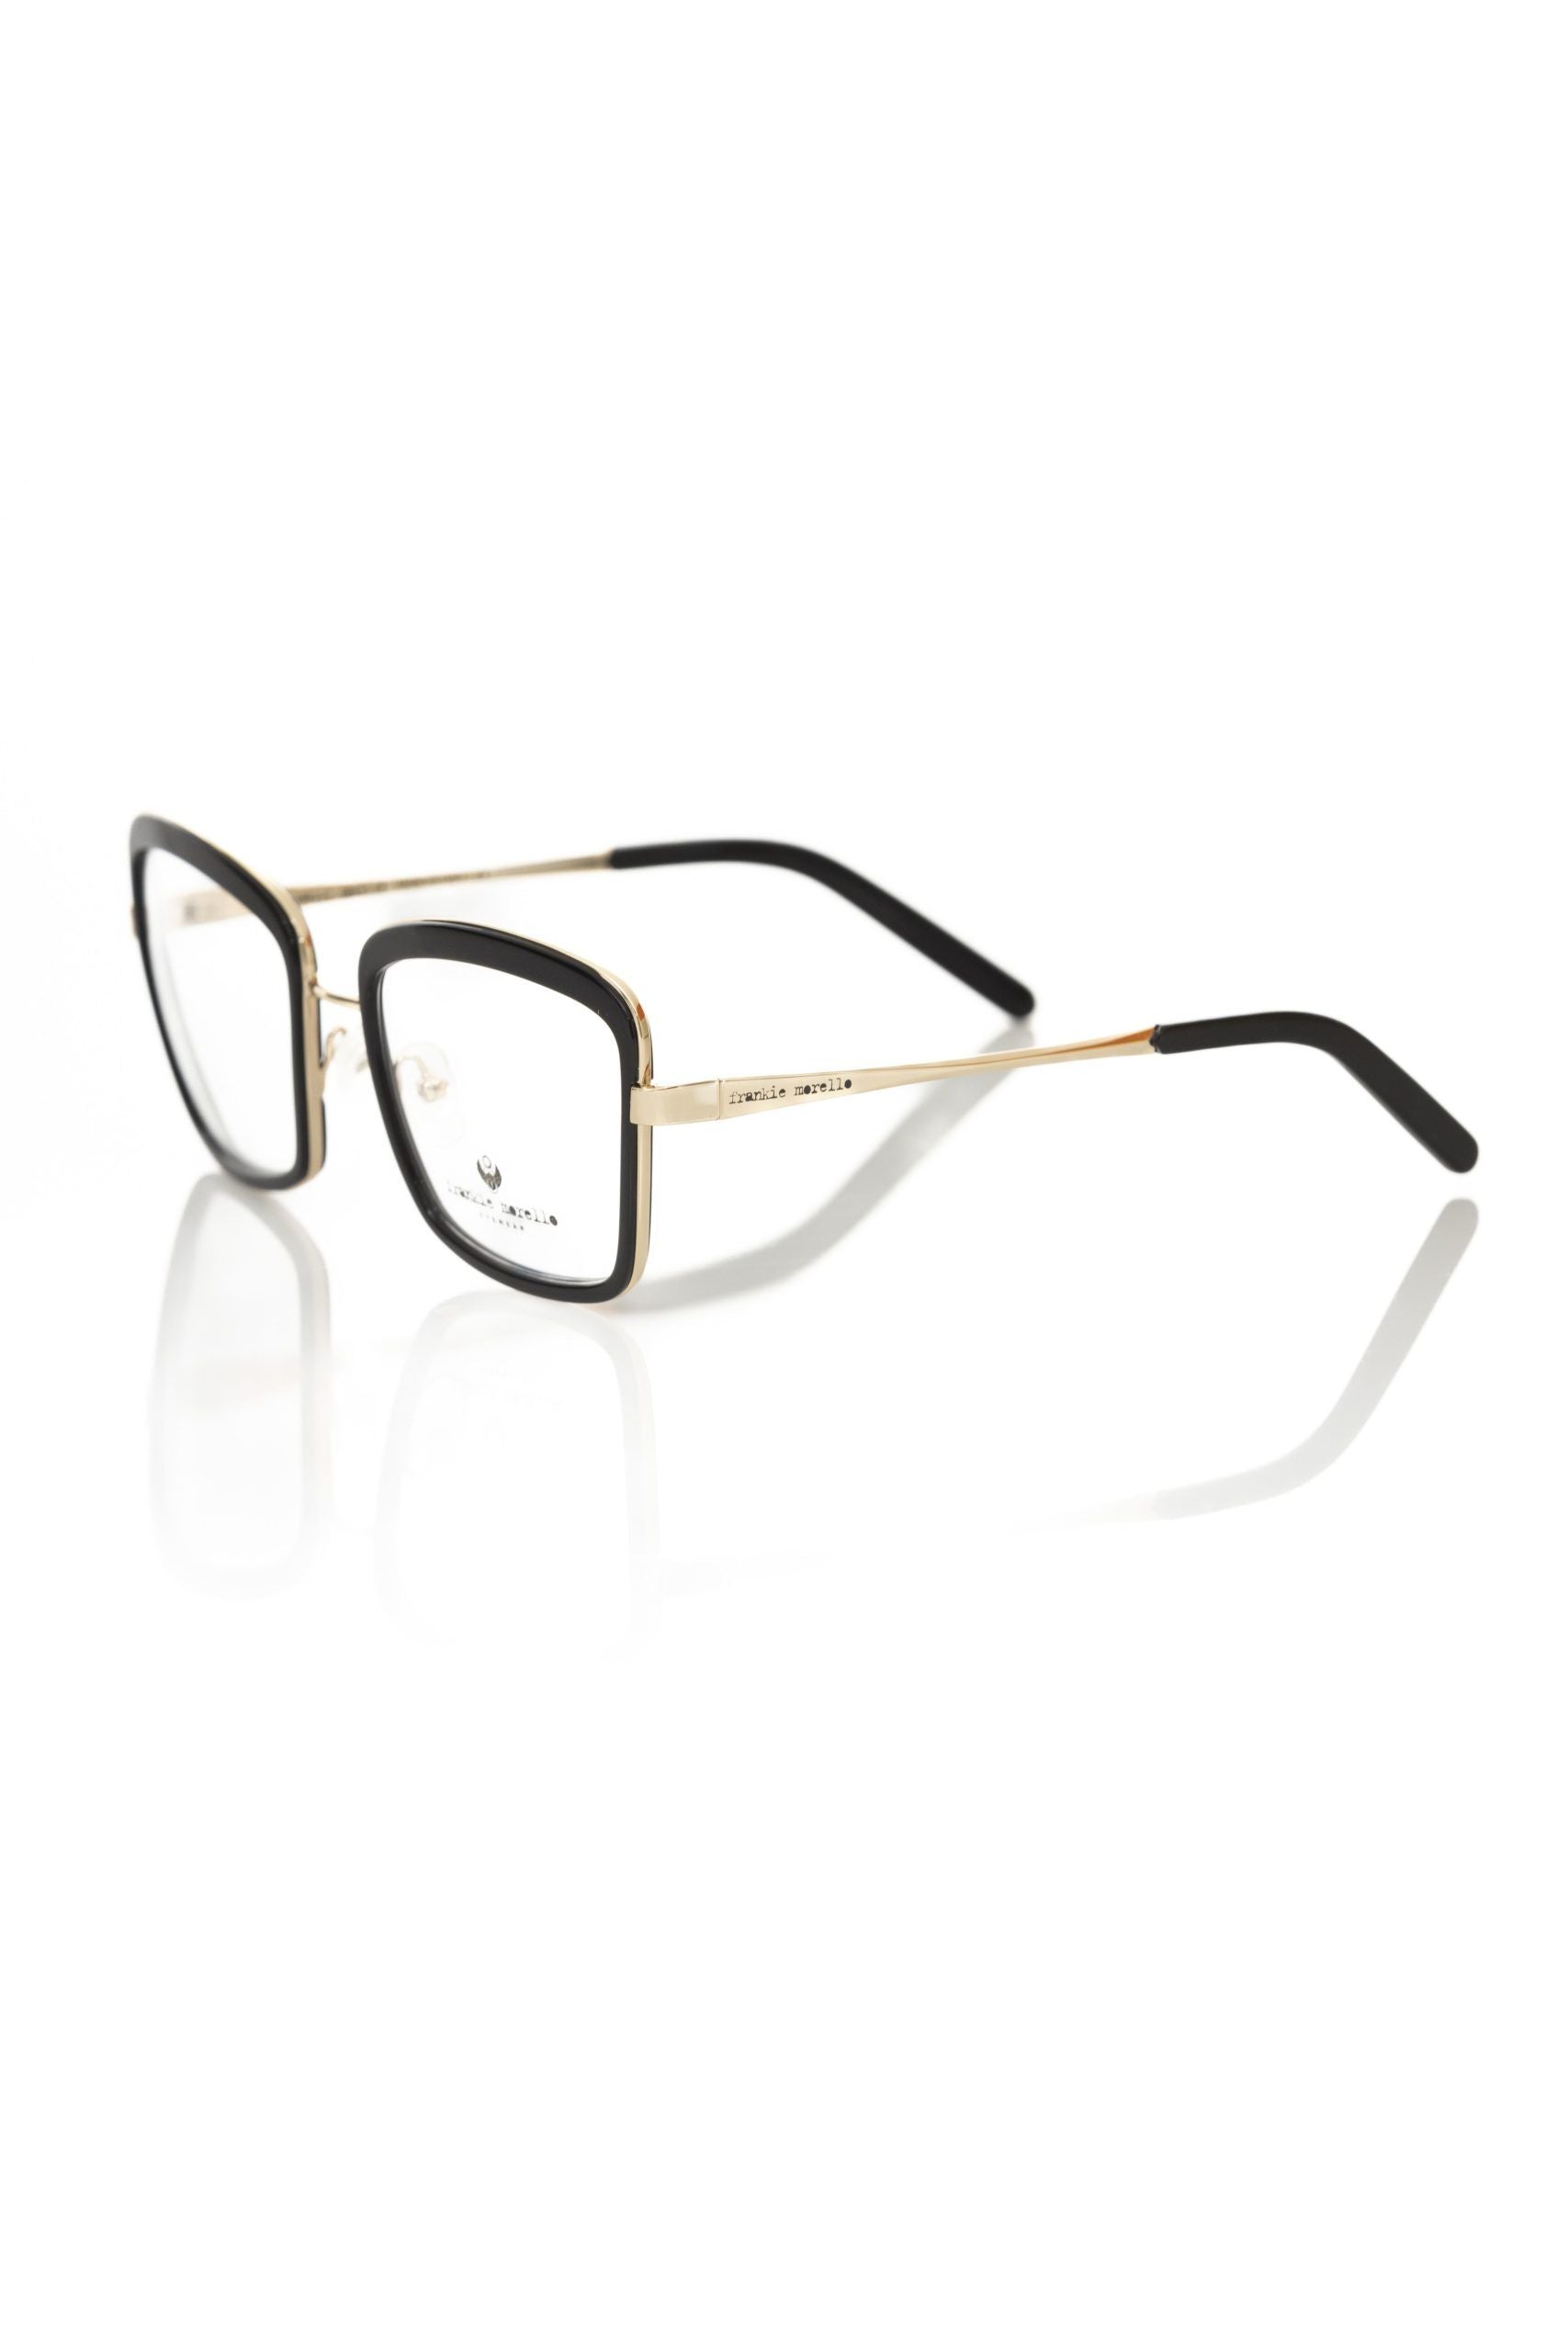 Frankie Morello FRMO-22103 Black Metallic Fibre Frames - Designed by Frankie Morello Available to Buy at a Discounted Price on Moon Behind The Hill Online Designer Discount Store